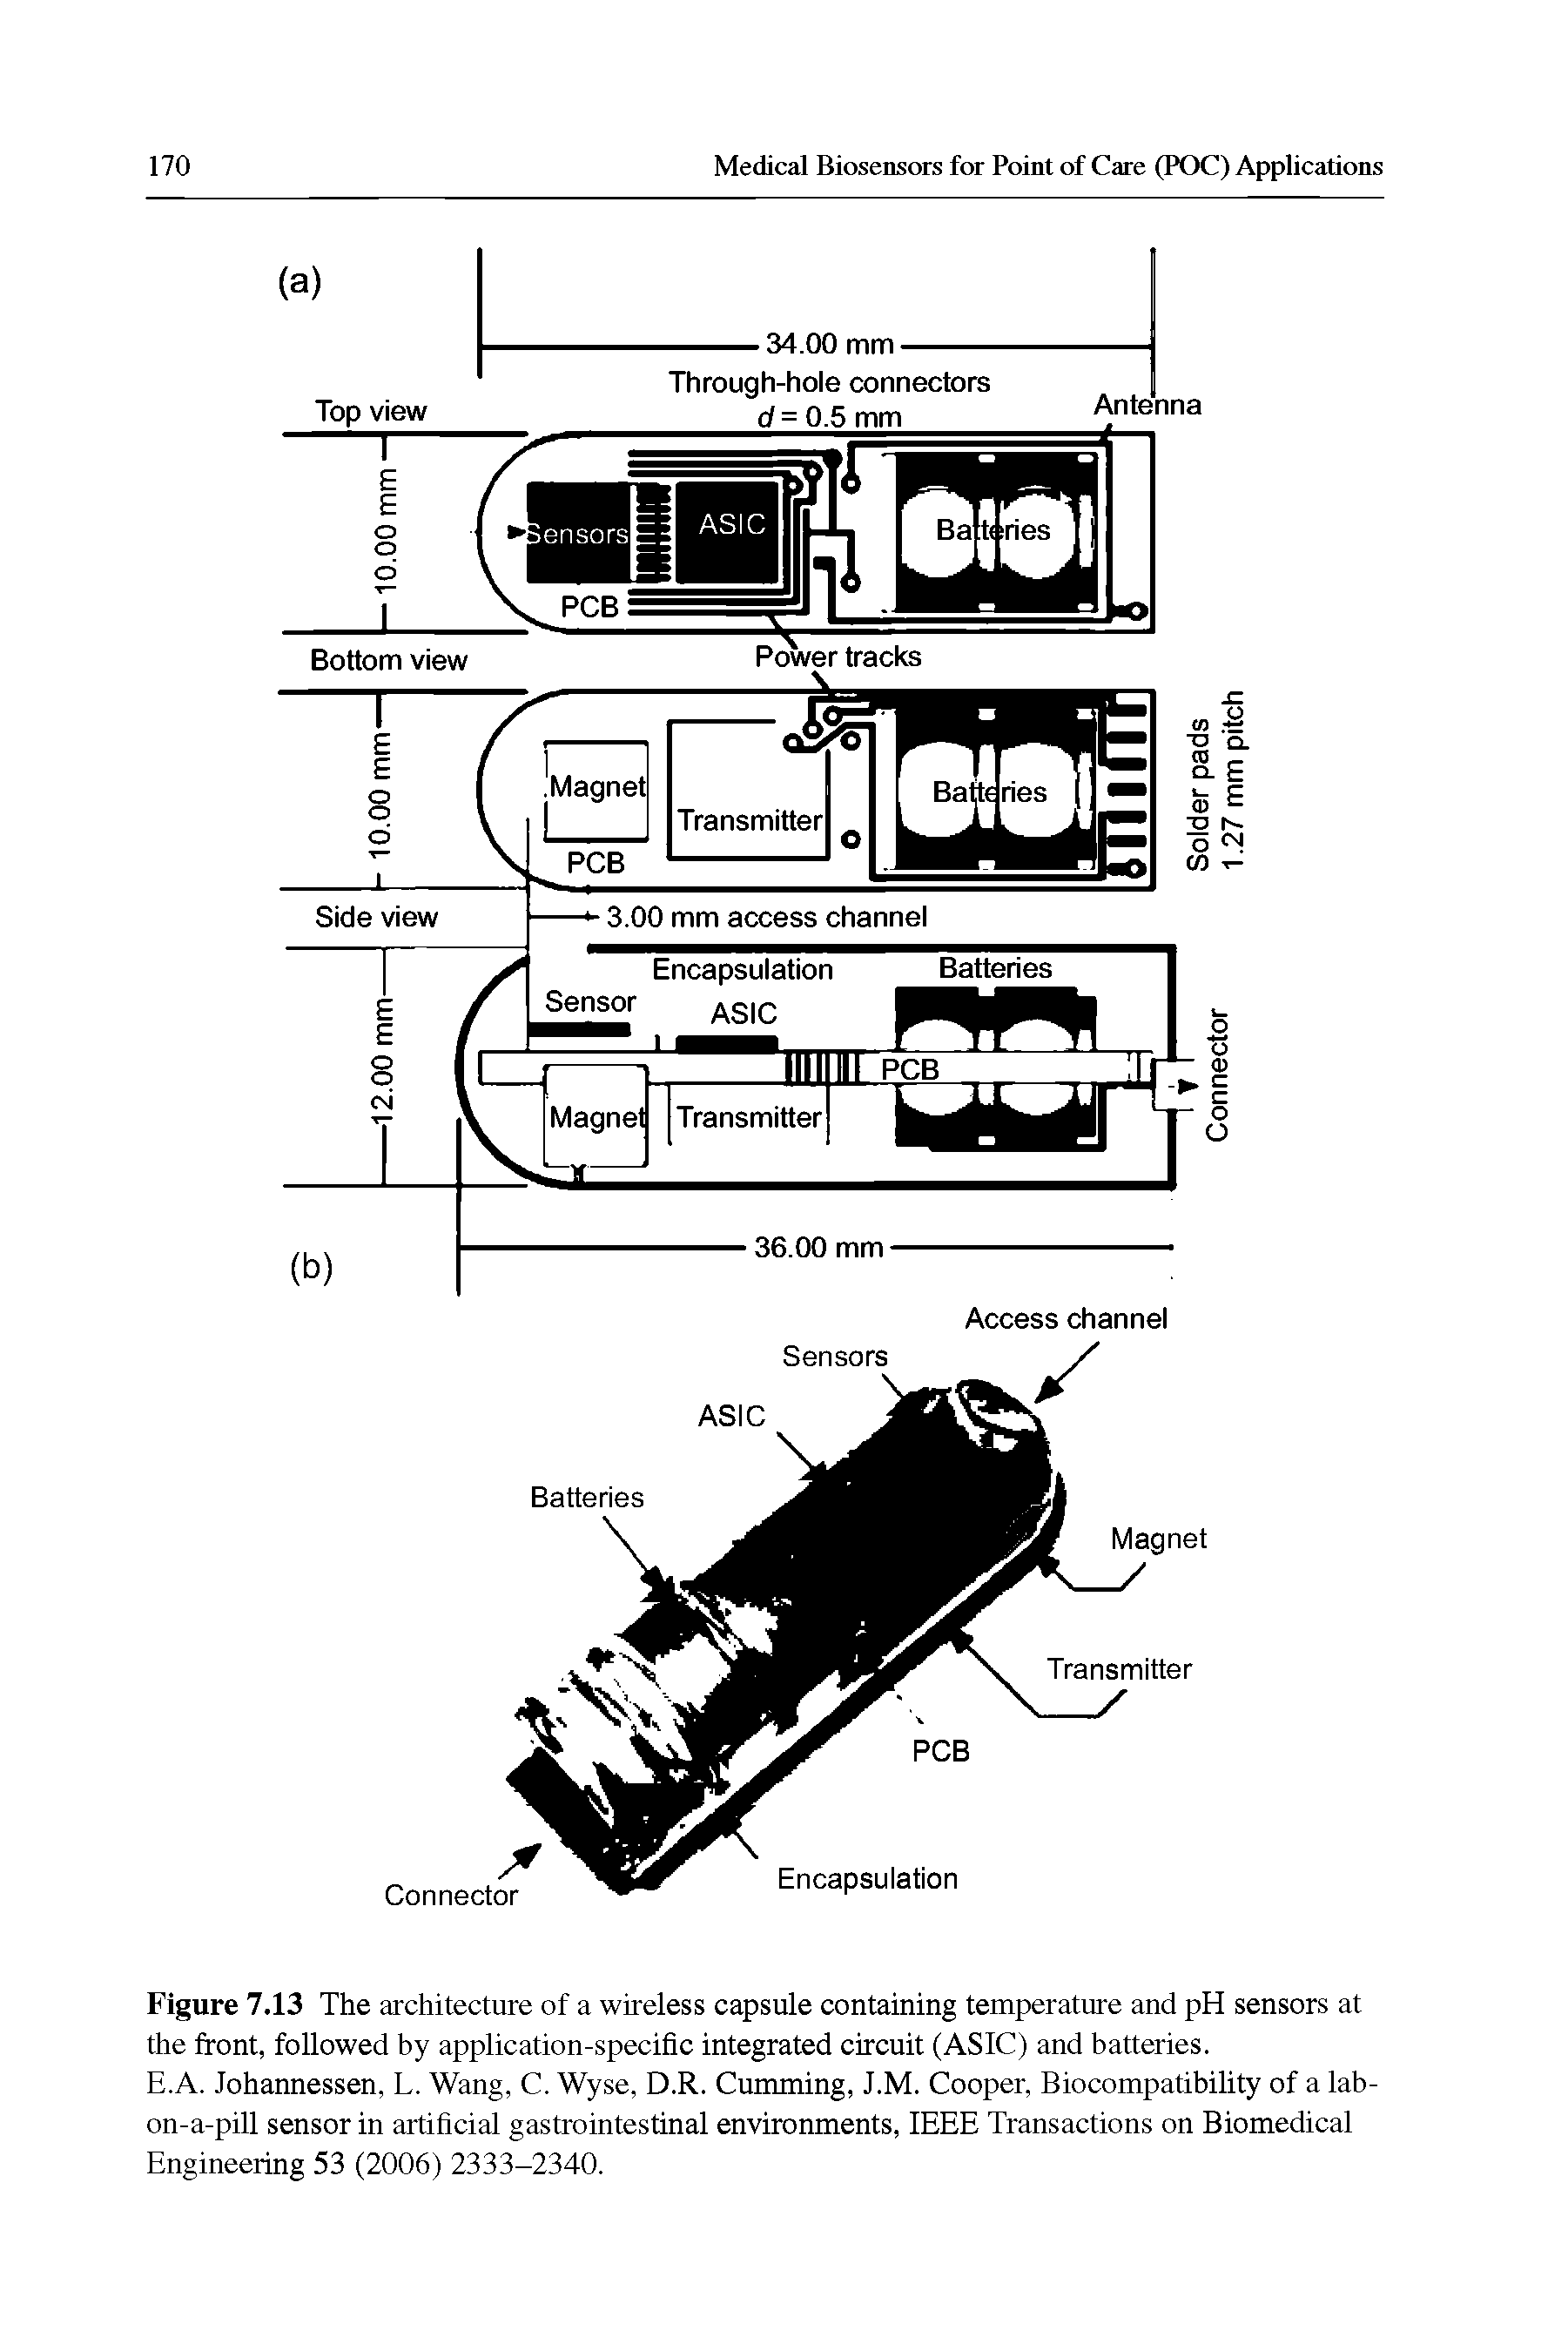 Figure 7.13 The architecture of a wireless capsule containing temperature and pH sensors at the front, followed by application-specific integrated circuit (ASIC) and batteries.